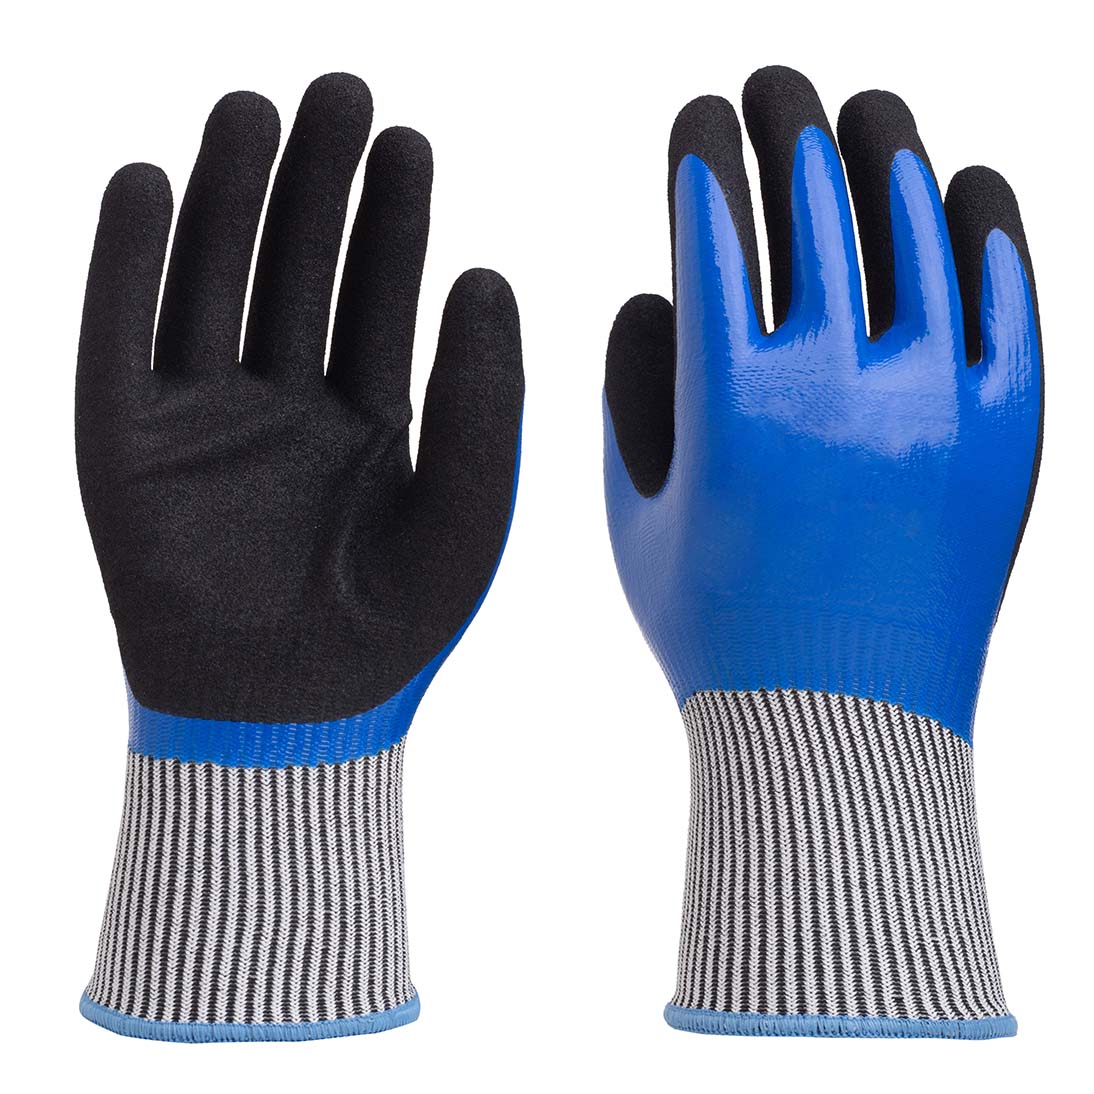 13G A6 cut resistant glove double layer nitrile coated